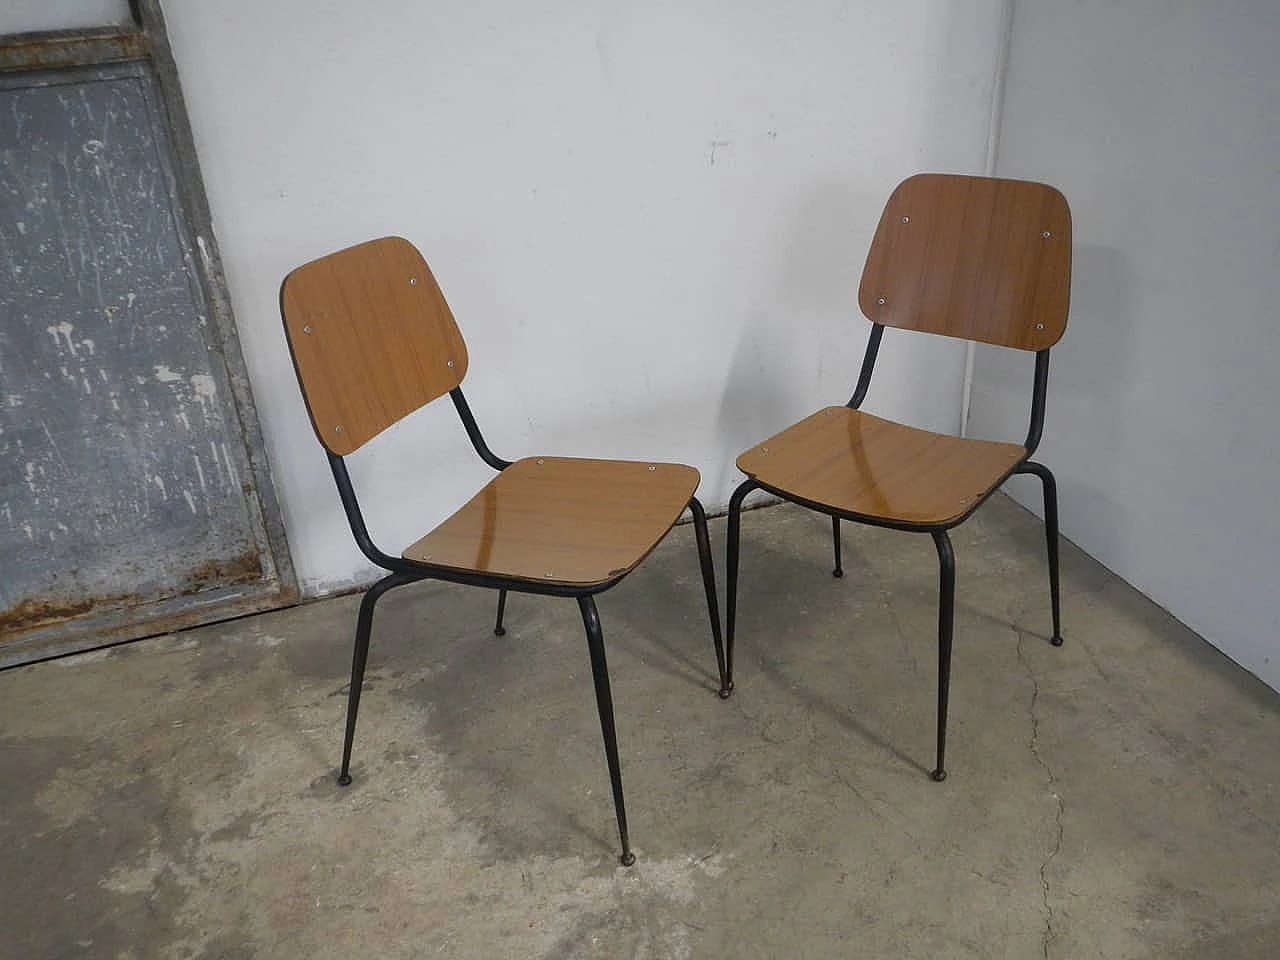 Pair of laminated chairs, 1950s 1062100